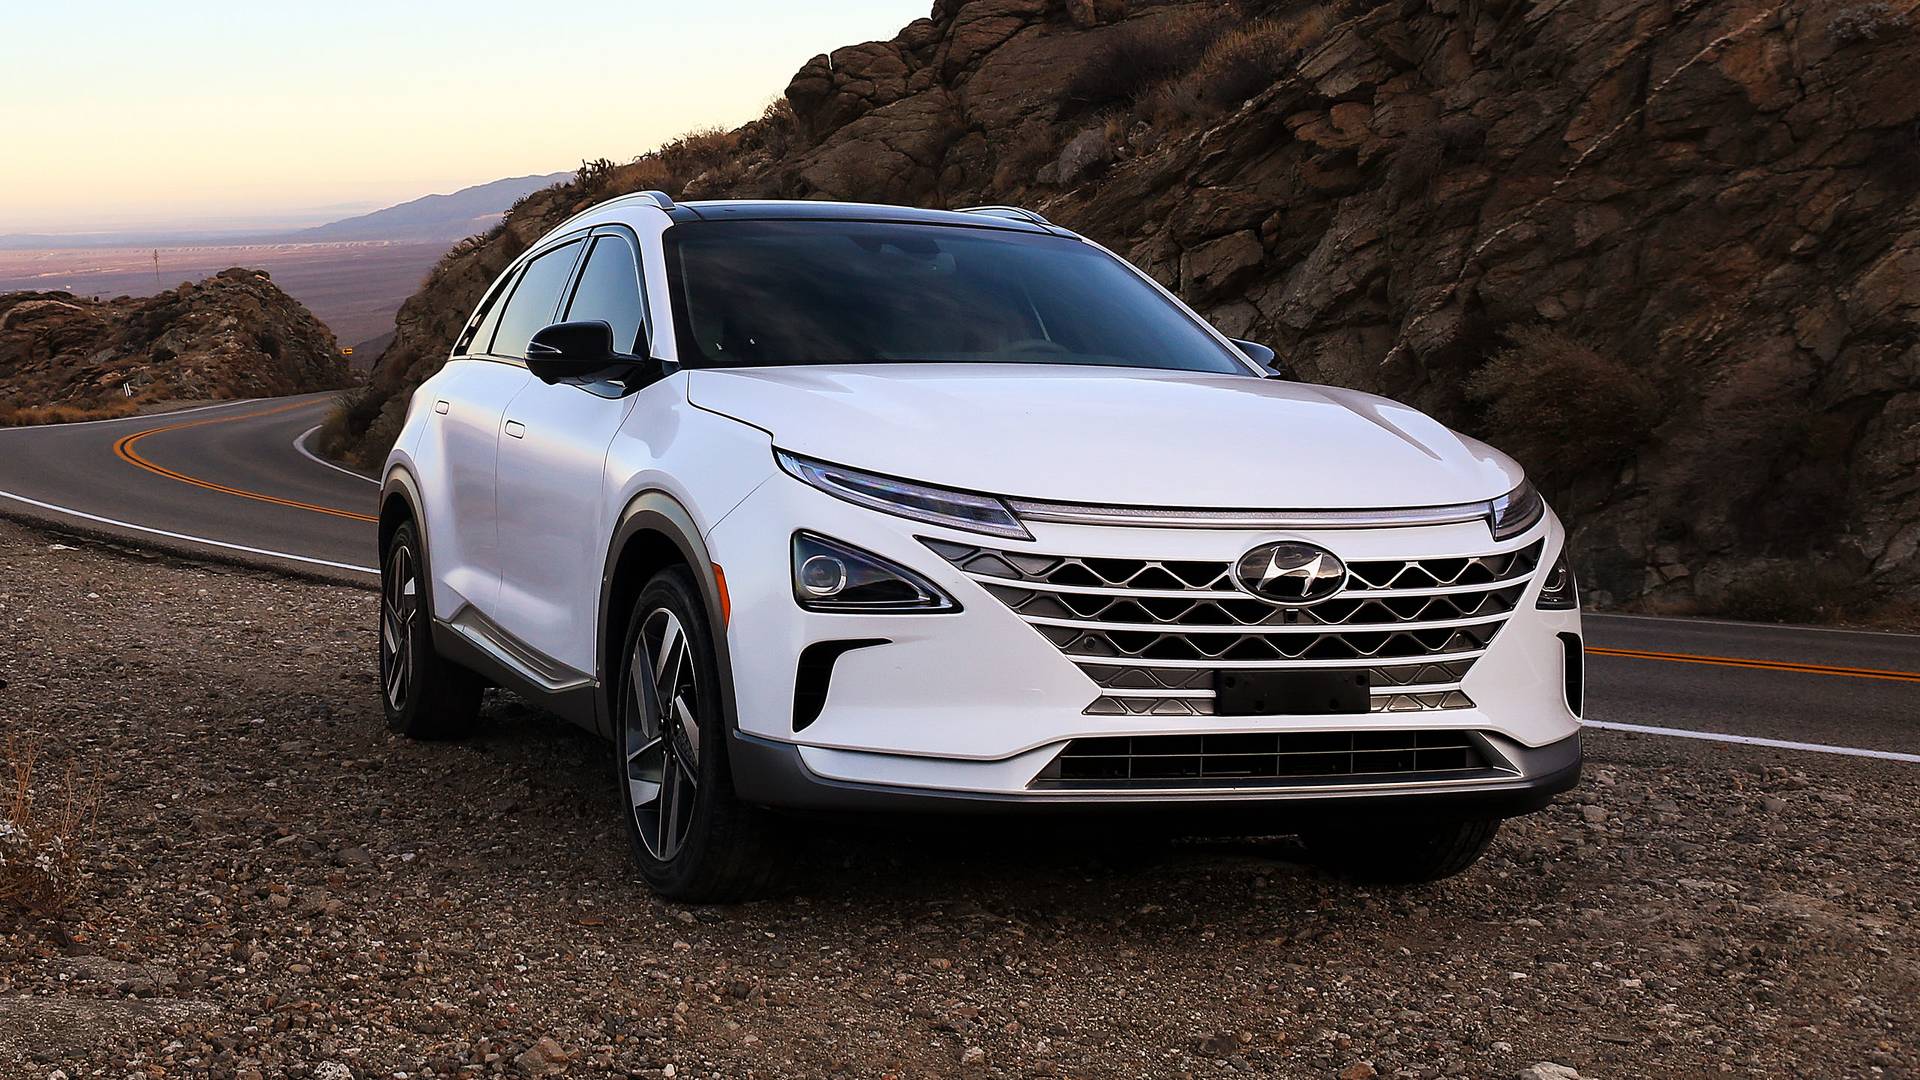 Cell powered SUV by Hyundai to be launched in